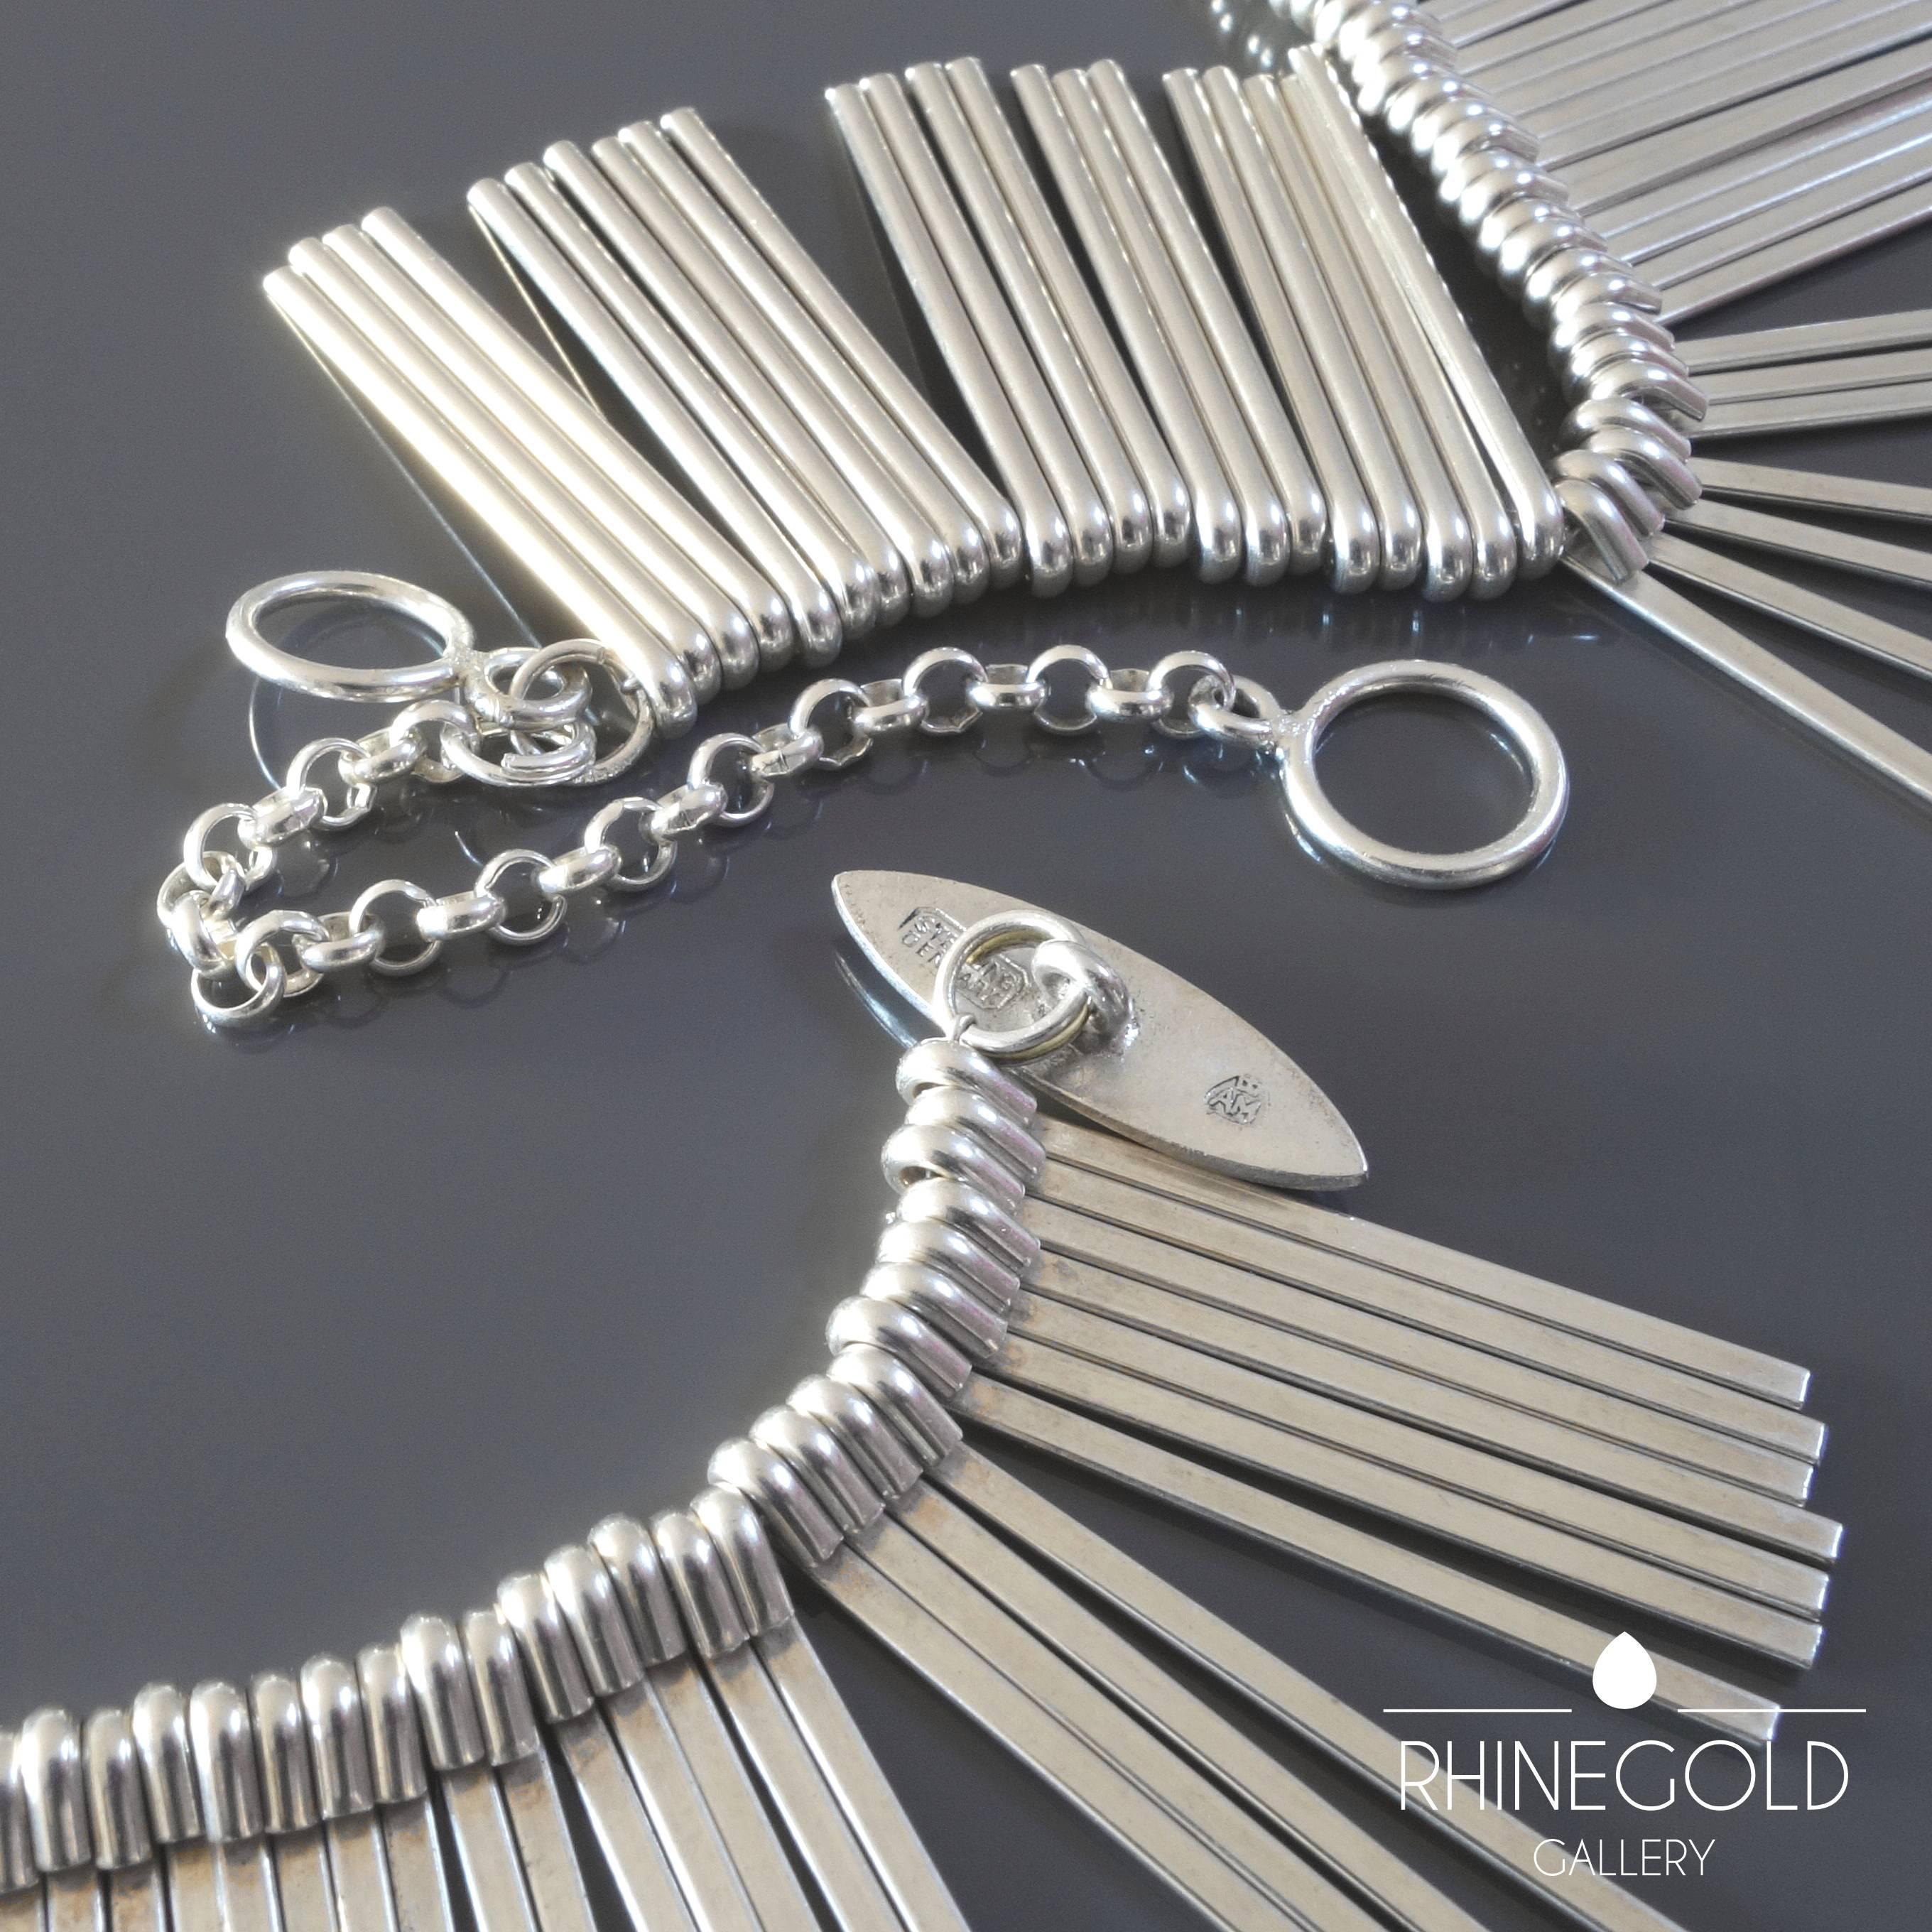 1970s Anton Michelsen Denmark Scandinavian Modernist Silver Fringe Necklace
Sterling silver
Lenght 38 cm and 43.5 cm (approx. 14 15/16” and 17 1/8”); width 2.6 cm (approx. 1”)
Weight approx. 83.8 grams
Marks: ‘STERLING DENMARK’, maker’s mark